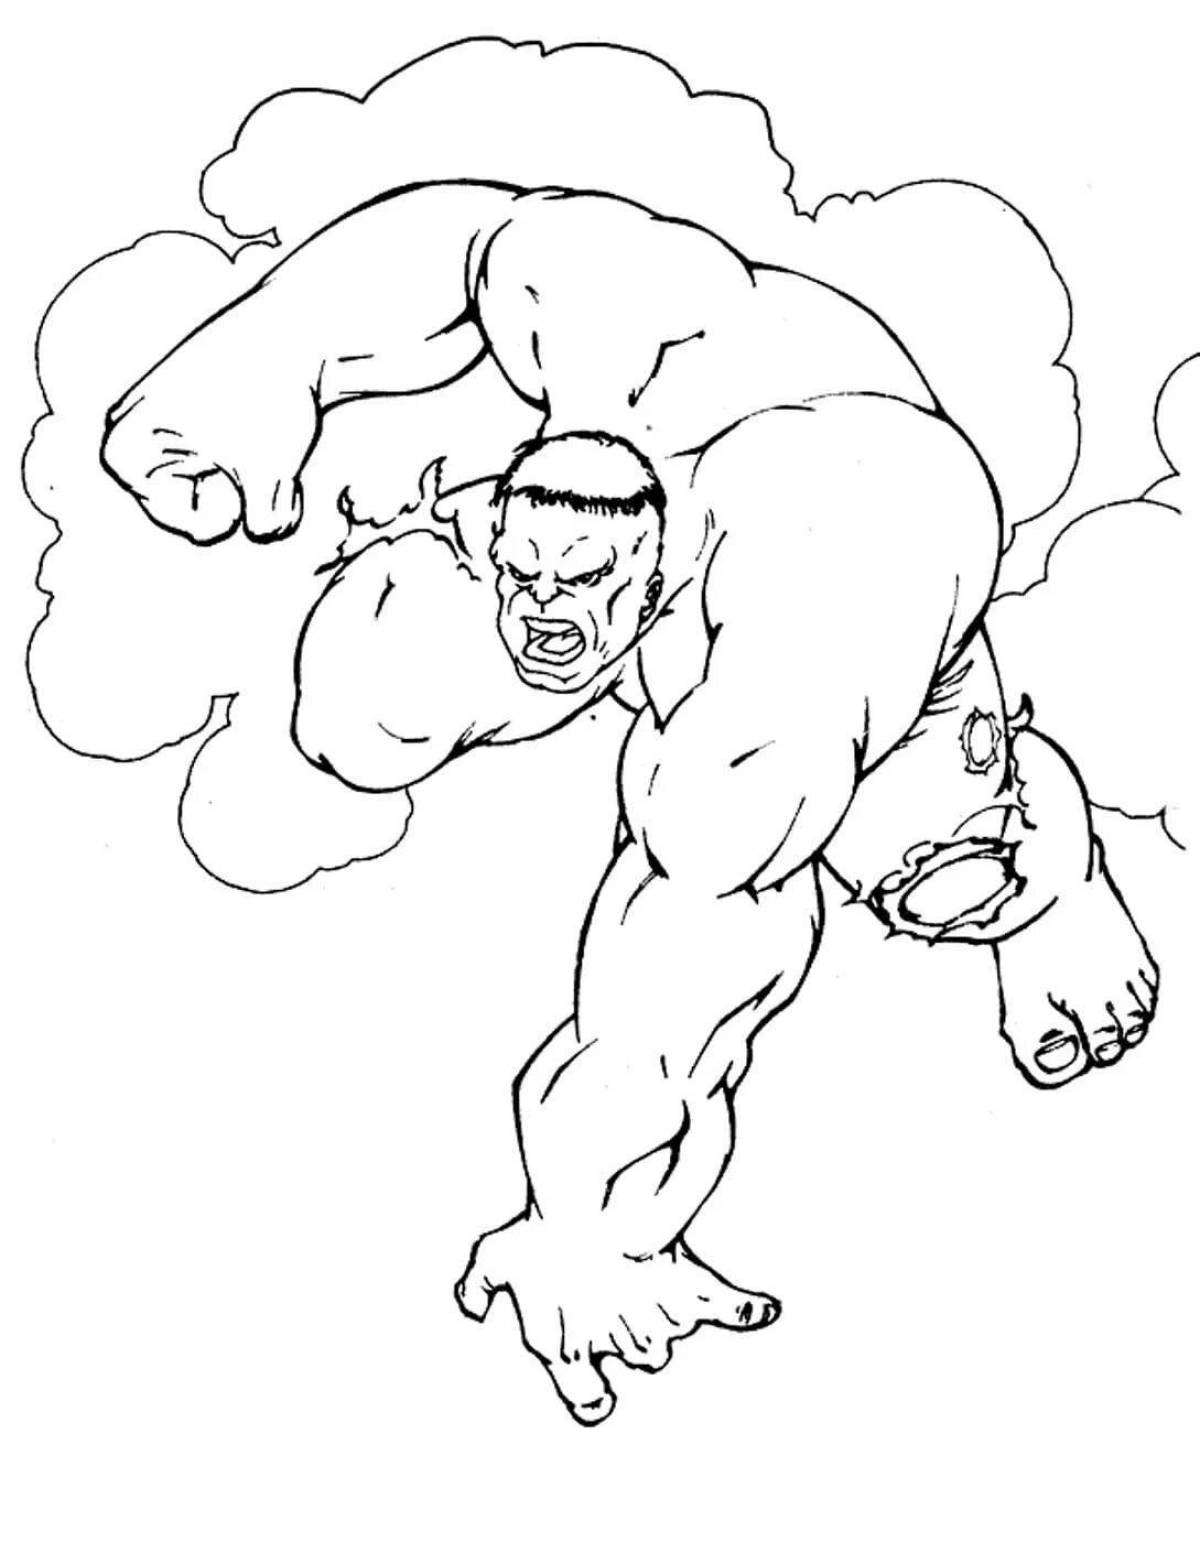 Hulk creative coloring book for 5-6 year olds